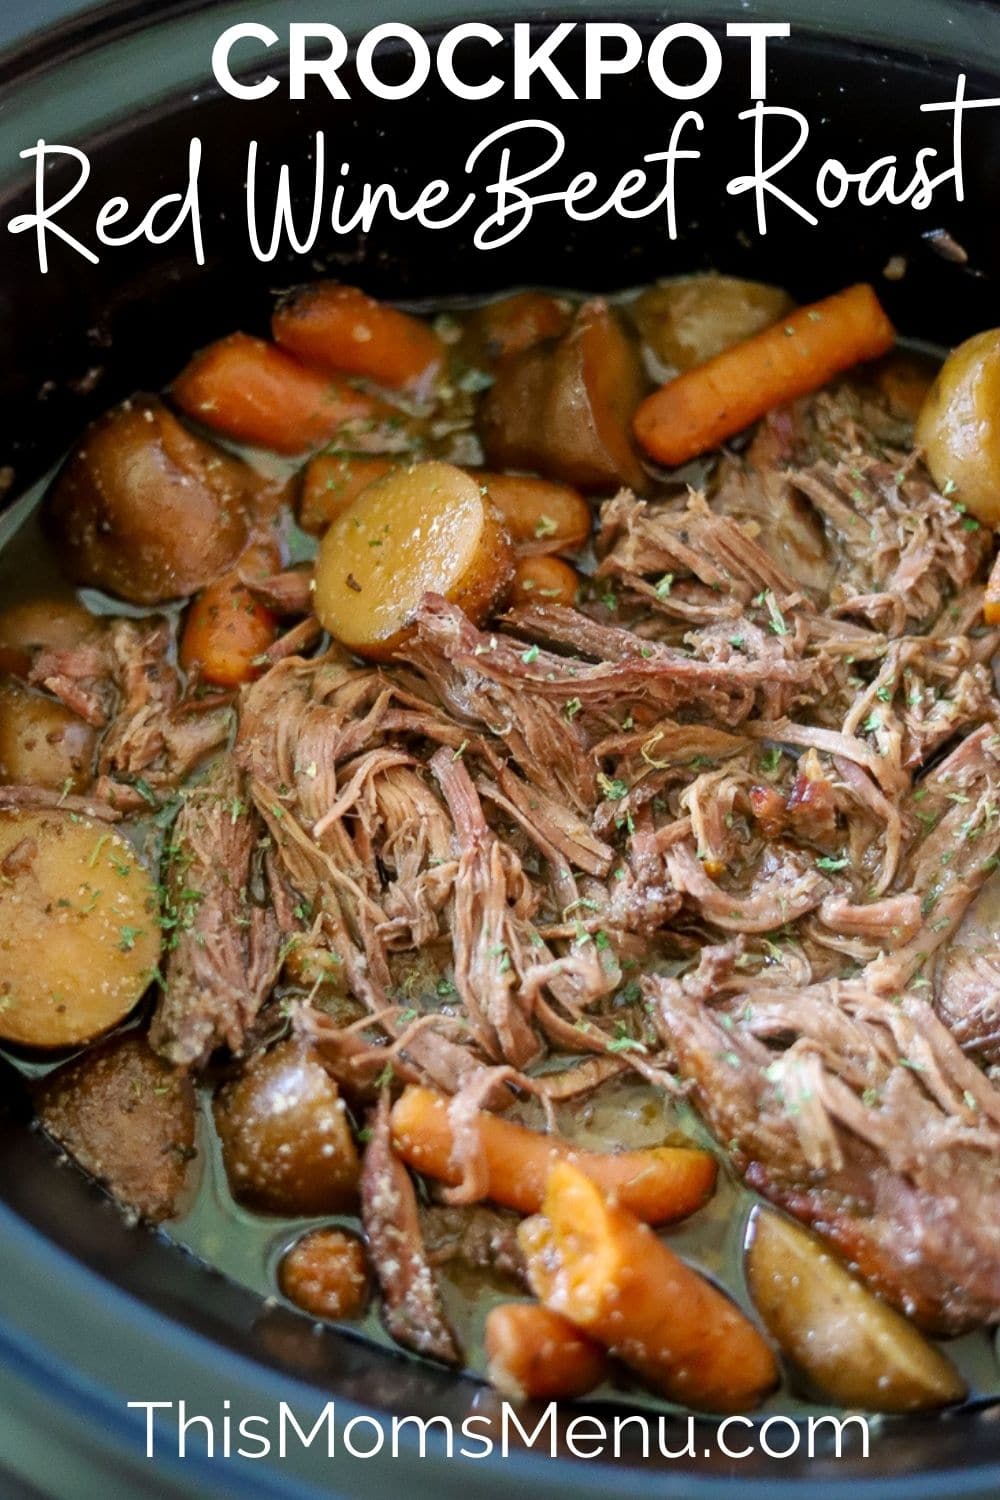 A black crockpot full of red wine beef roast with carrots and potatoes, there is a white text overlay with the title of the recipe.  